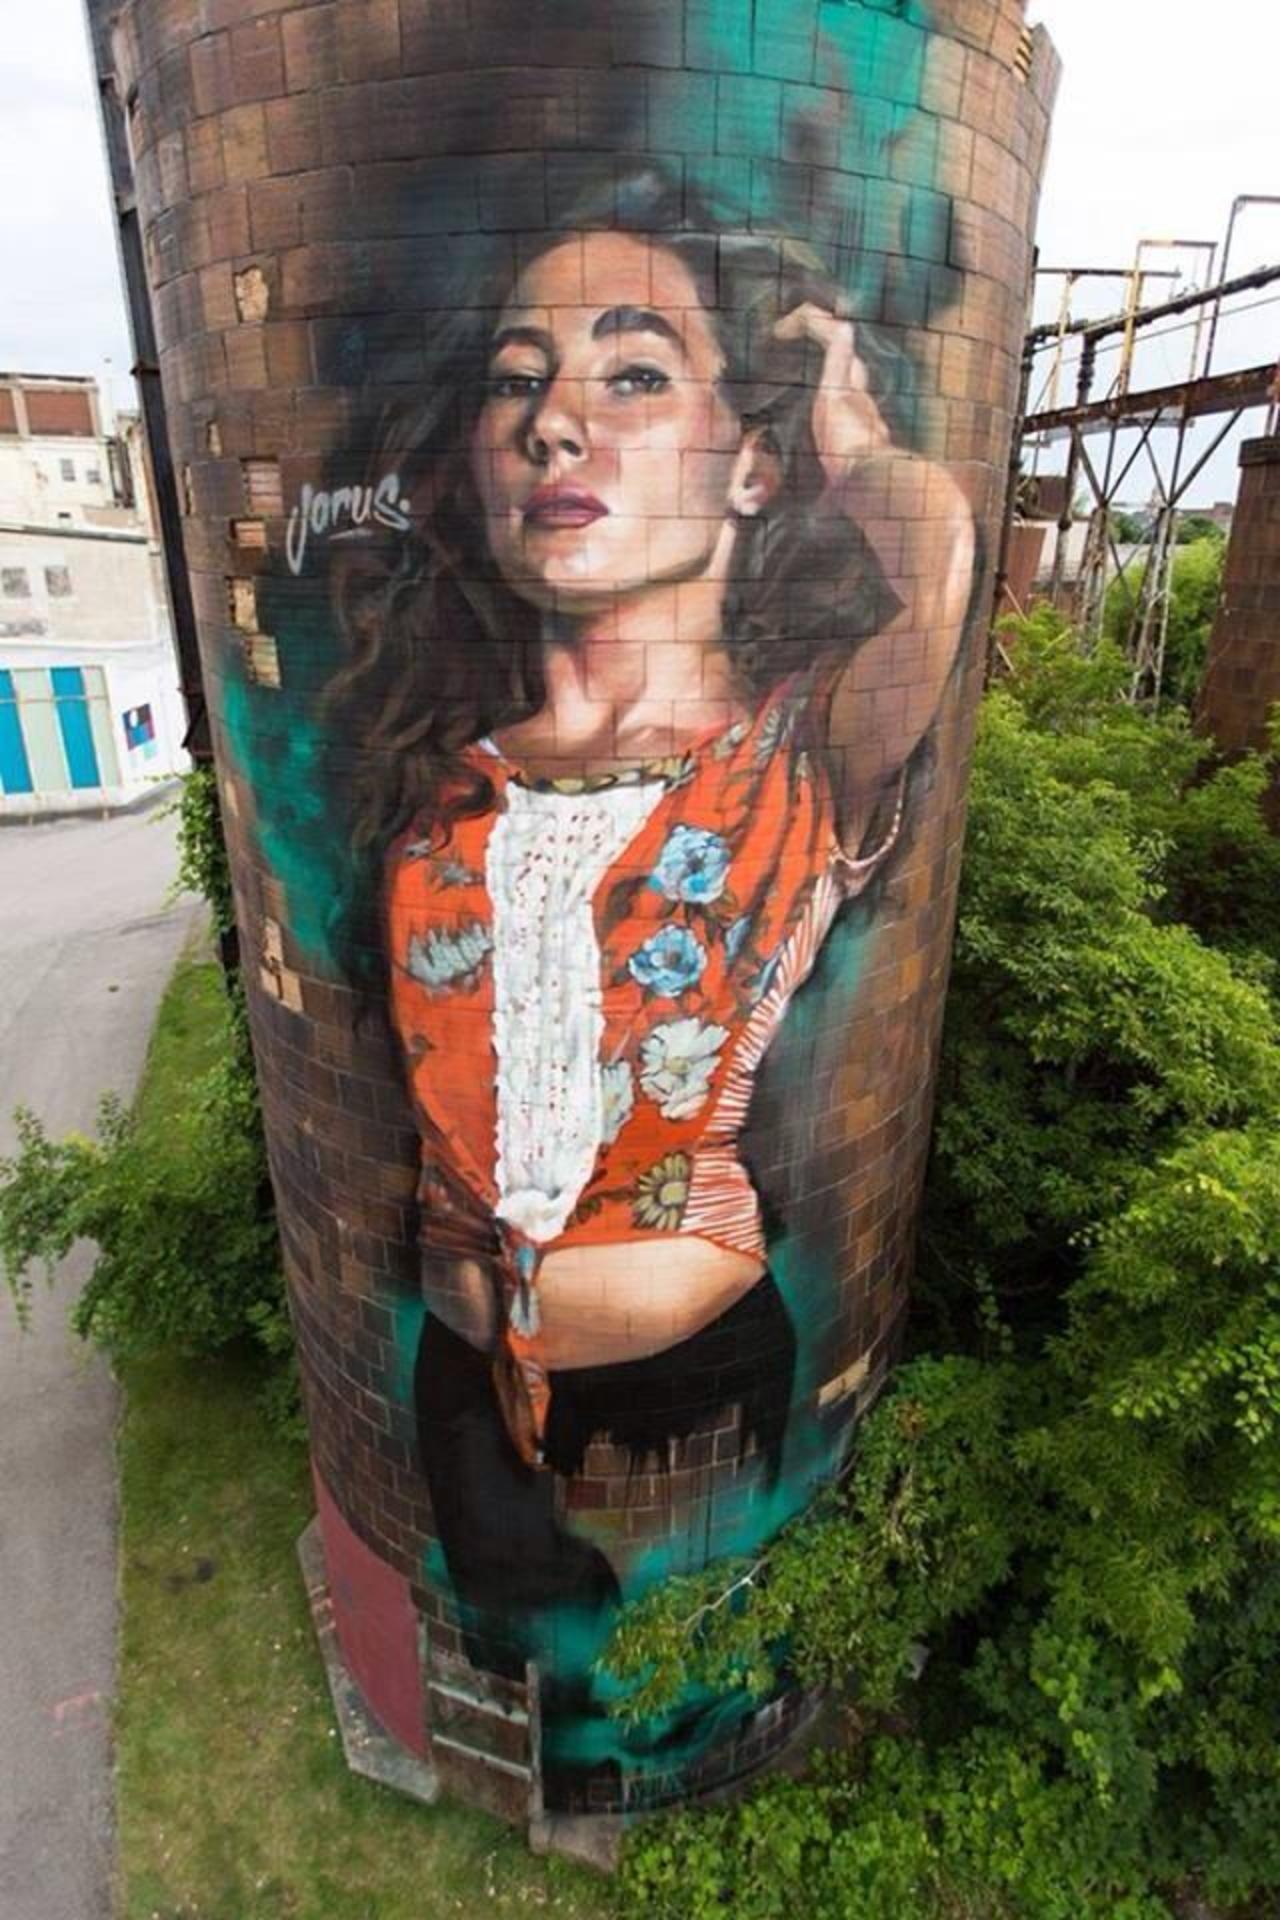 Artist 'Young Jarus' new amazing Street Art mural located in Rochester, NY #art #mural #graffiti #streetart http://t.co/Ms3x6n1ePD